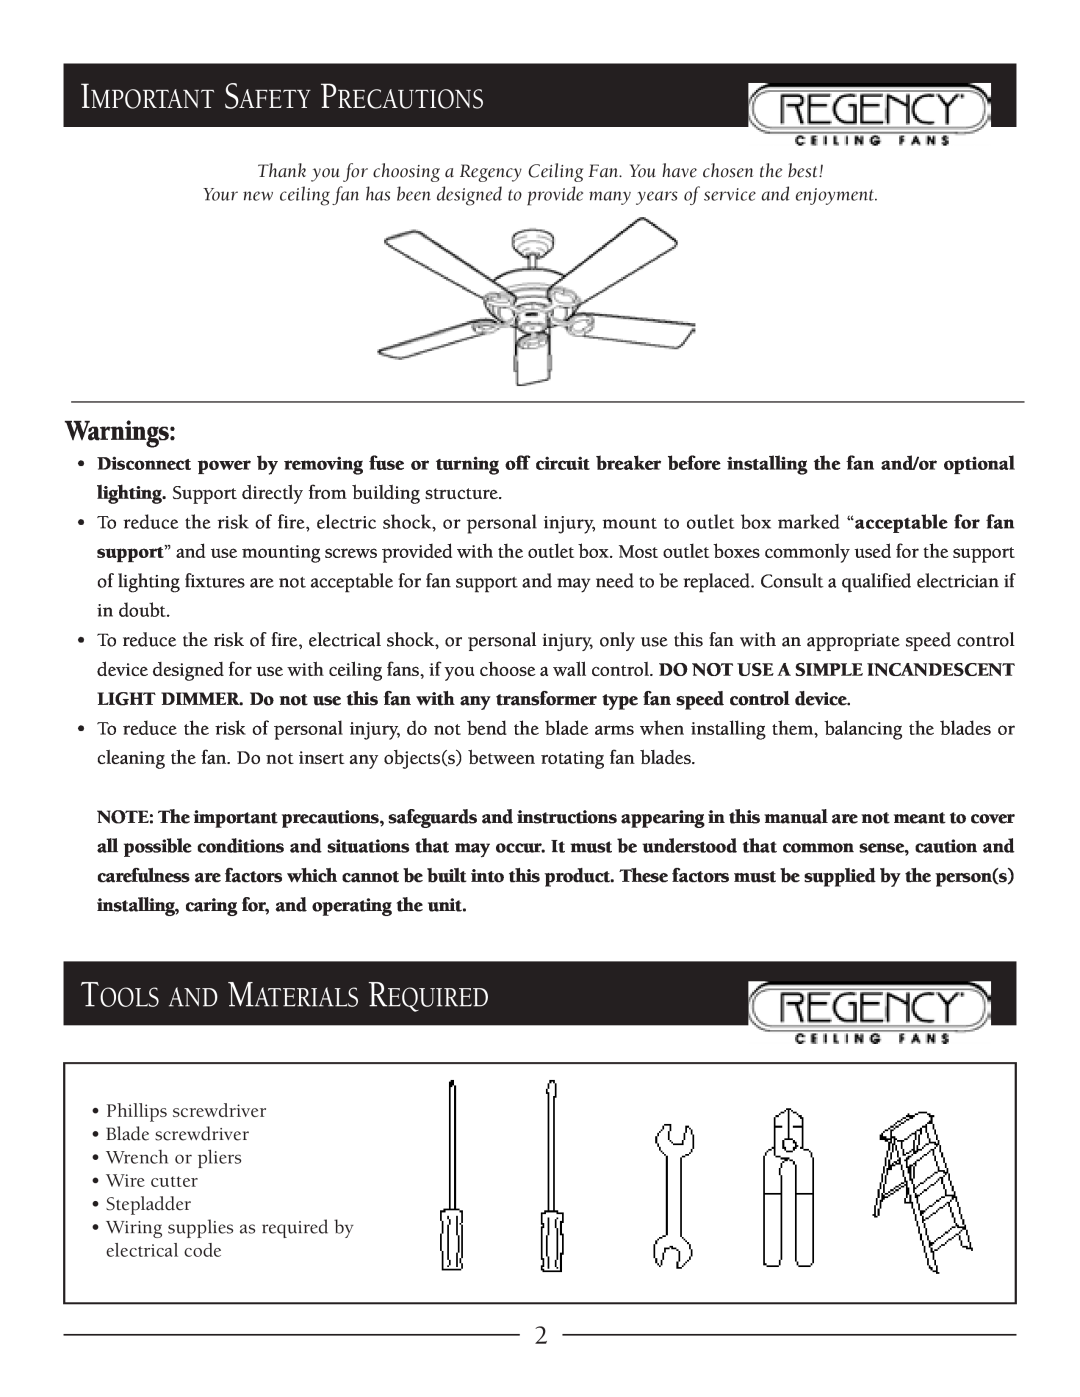 Regency Wraps LX owner manual Important Safety Precautions, Tools And Materials Required, Warnings 